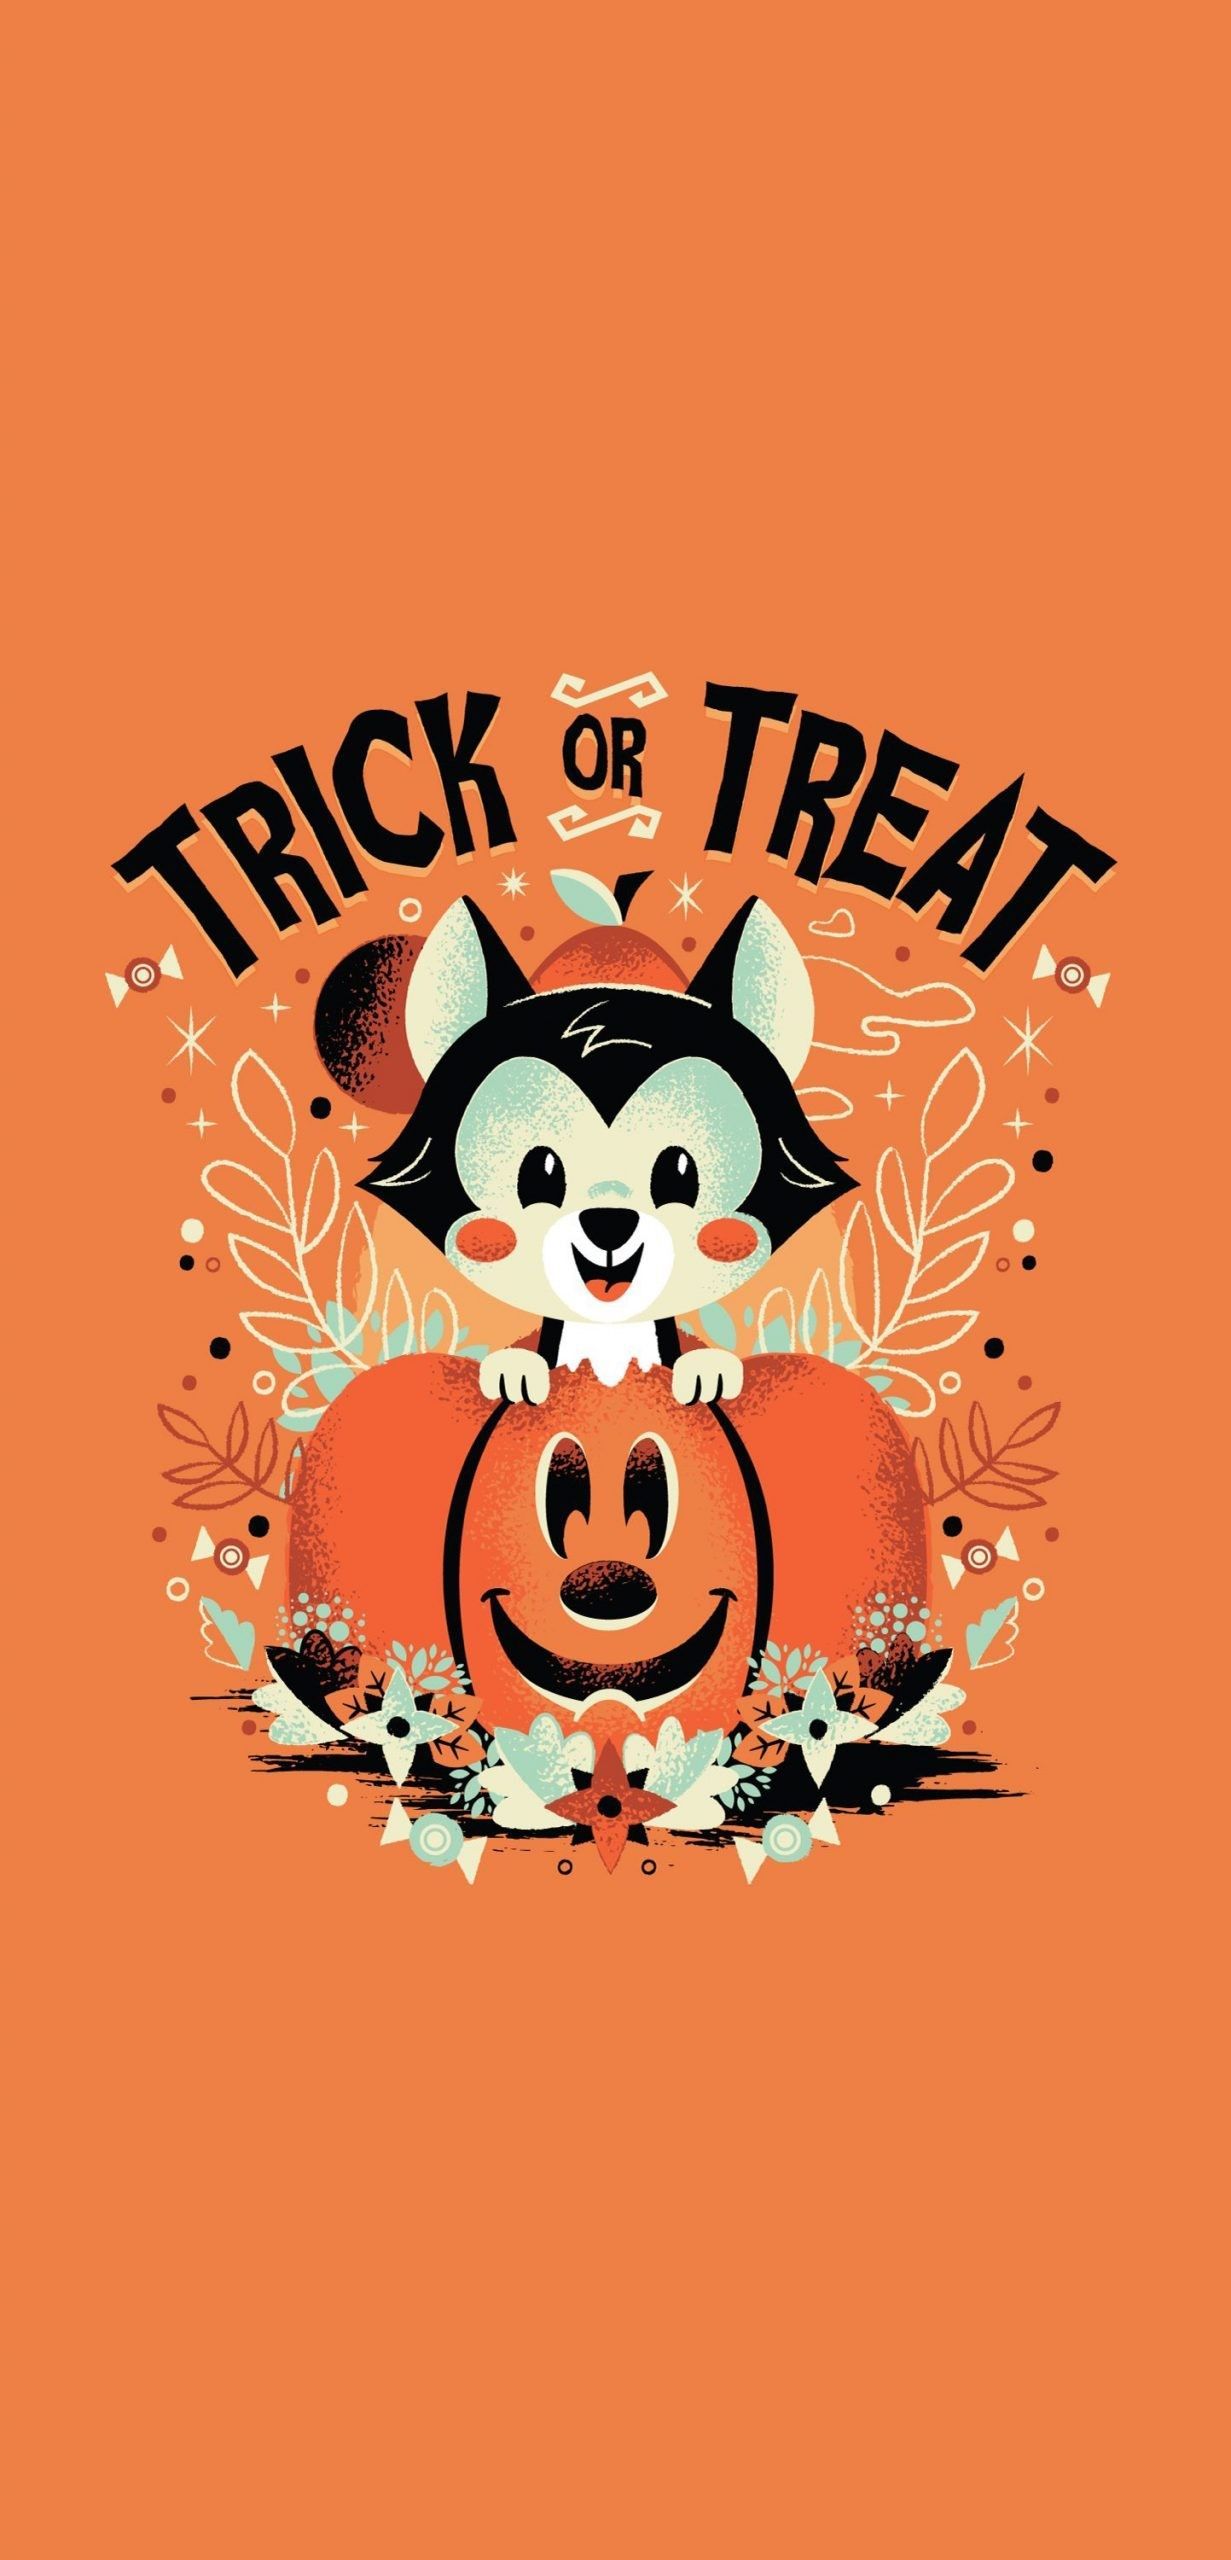 Trick or Treat Halloween wallpaper with a cute kitty - Cute Halloween